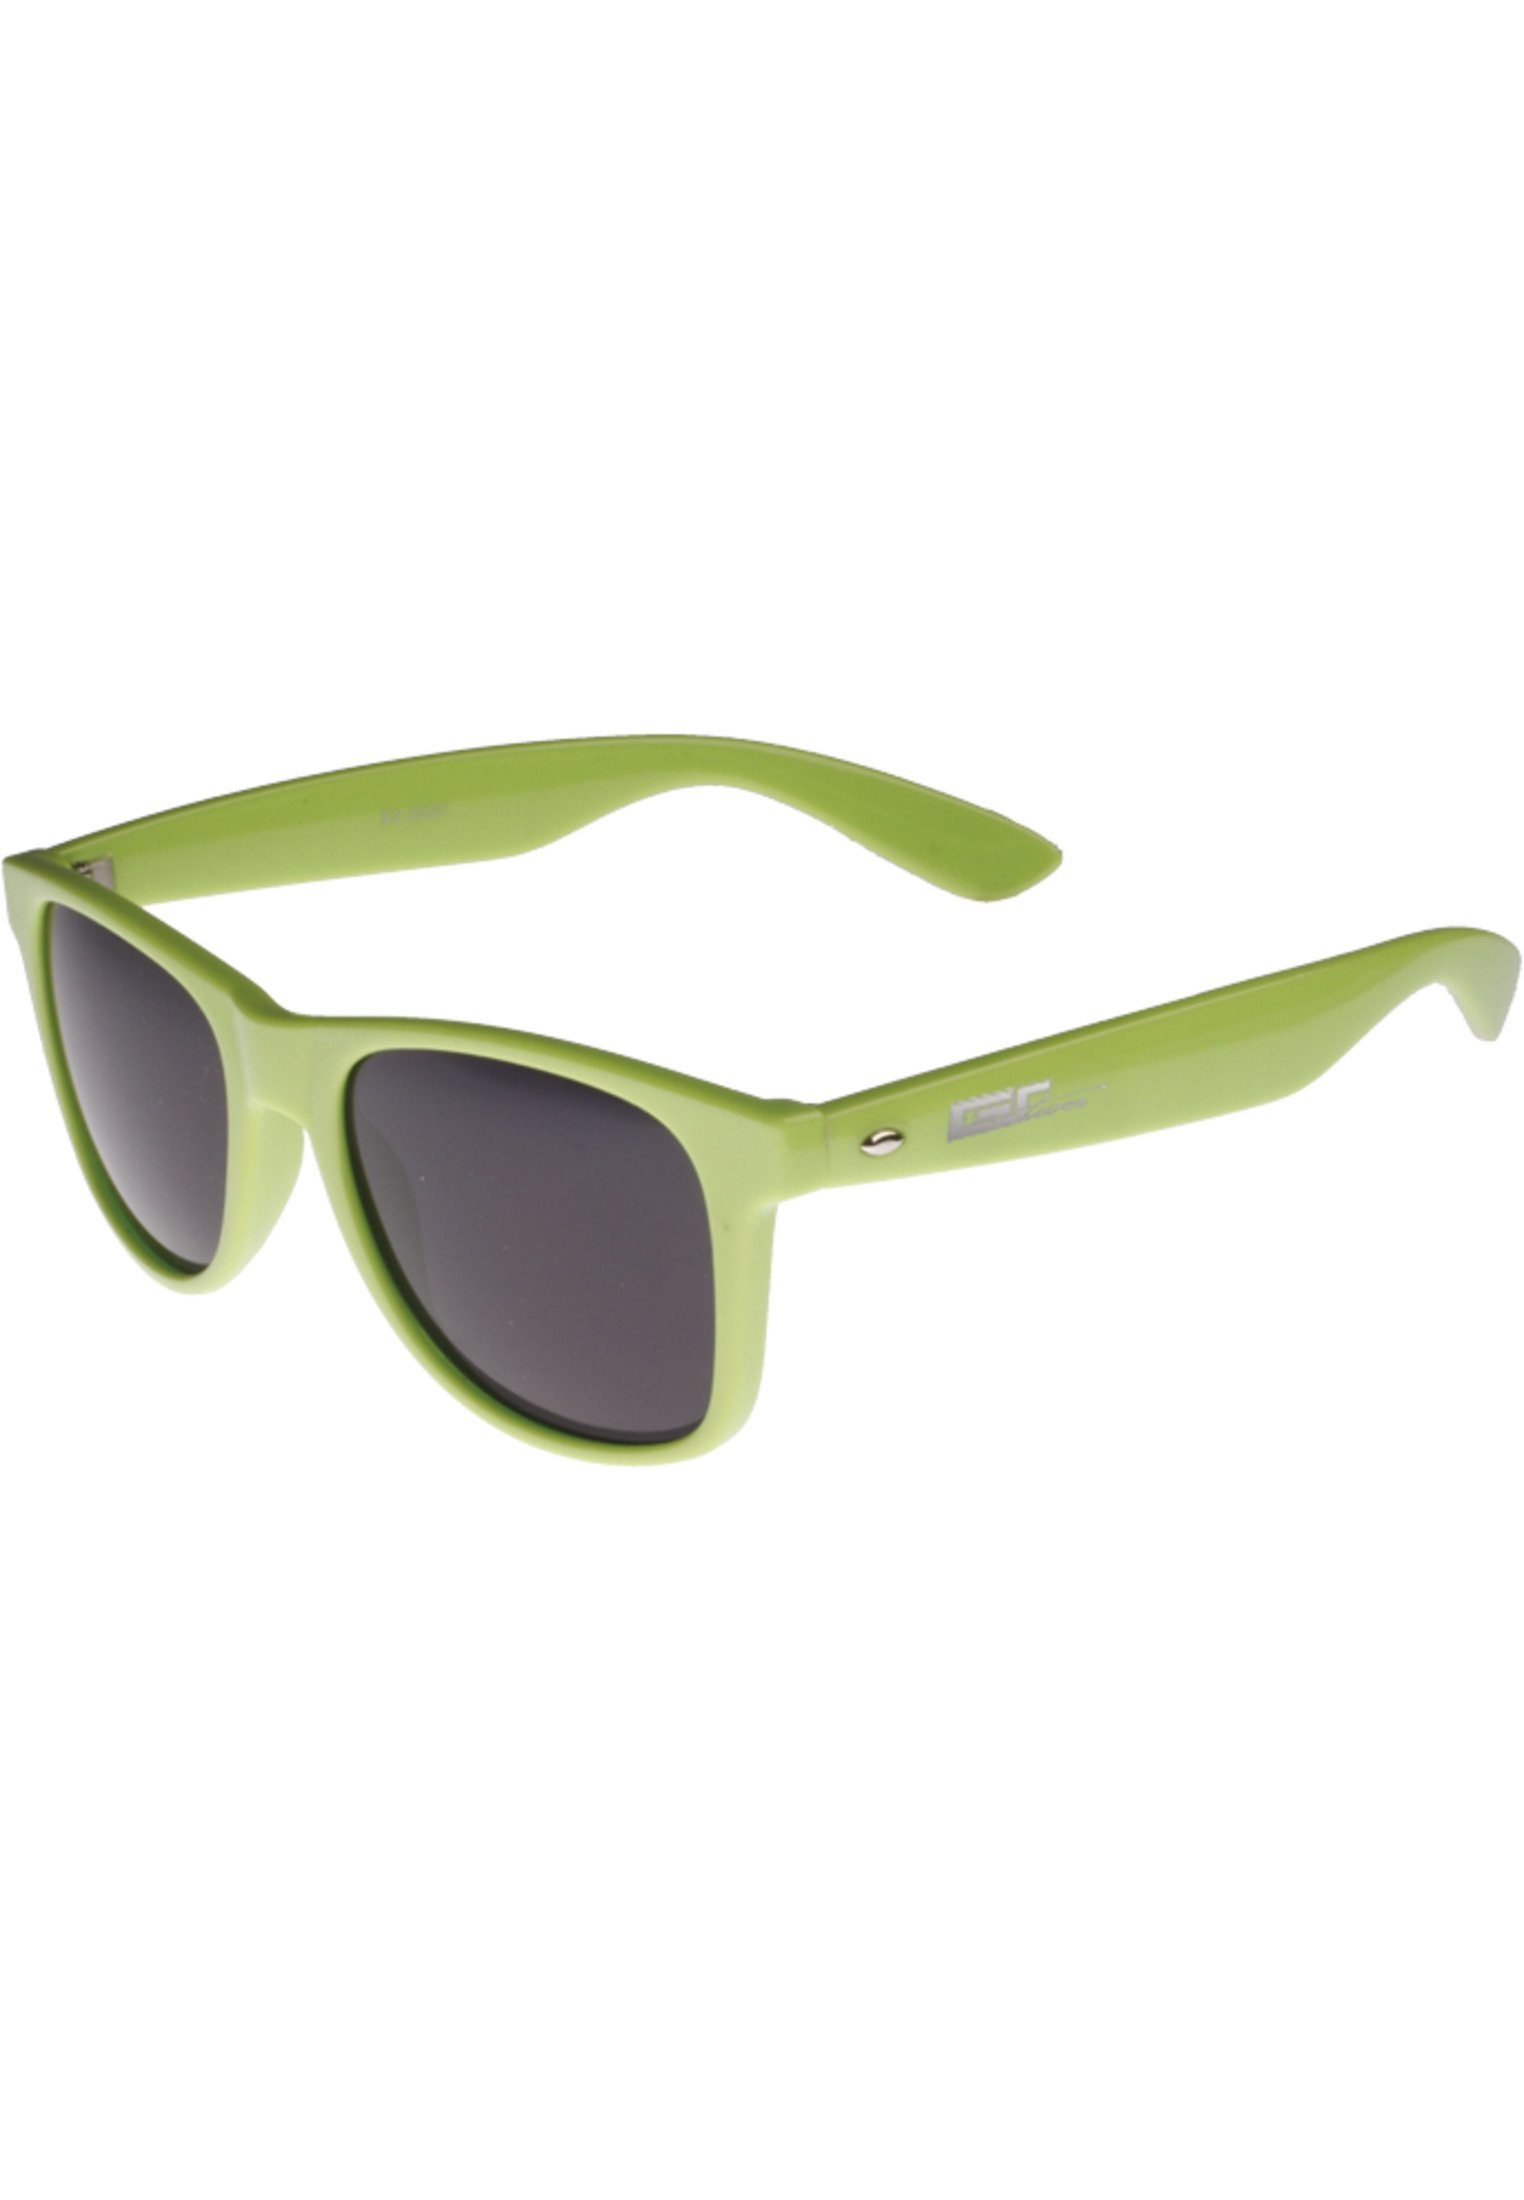 MSTRDS Sonnenbrille limegreen Accessoires Groove GStwo Shades